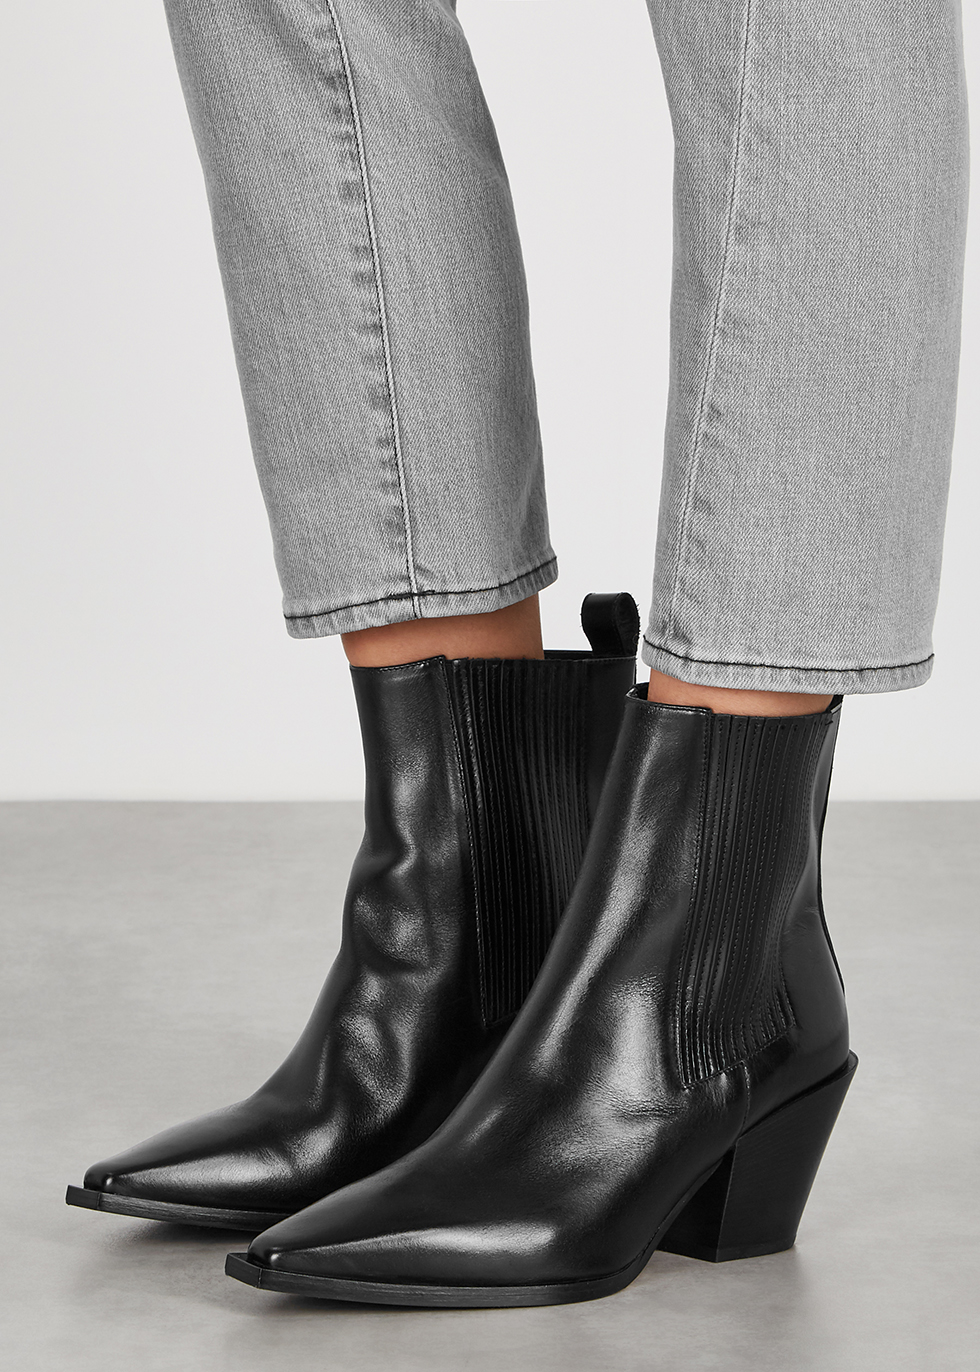 aeyde Kate 80 black leather ankle boots 